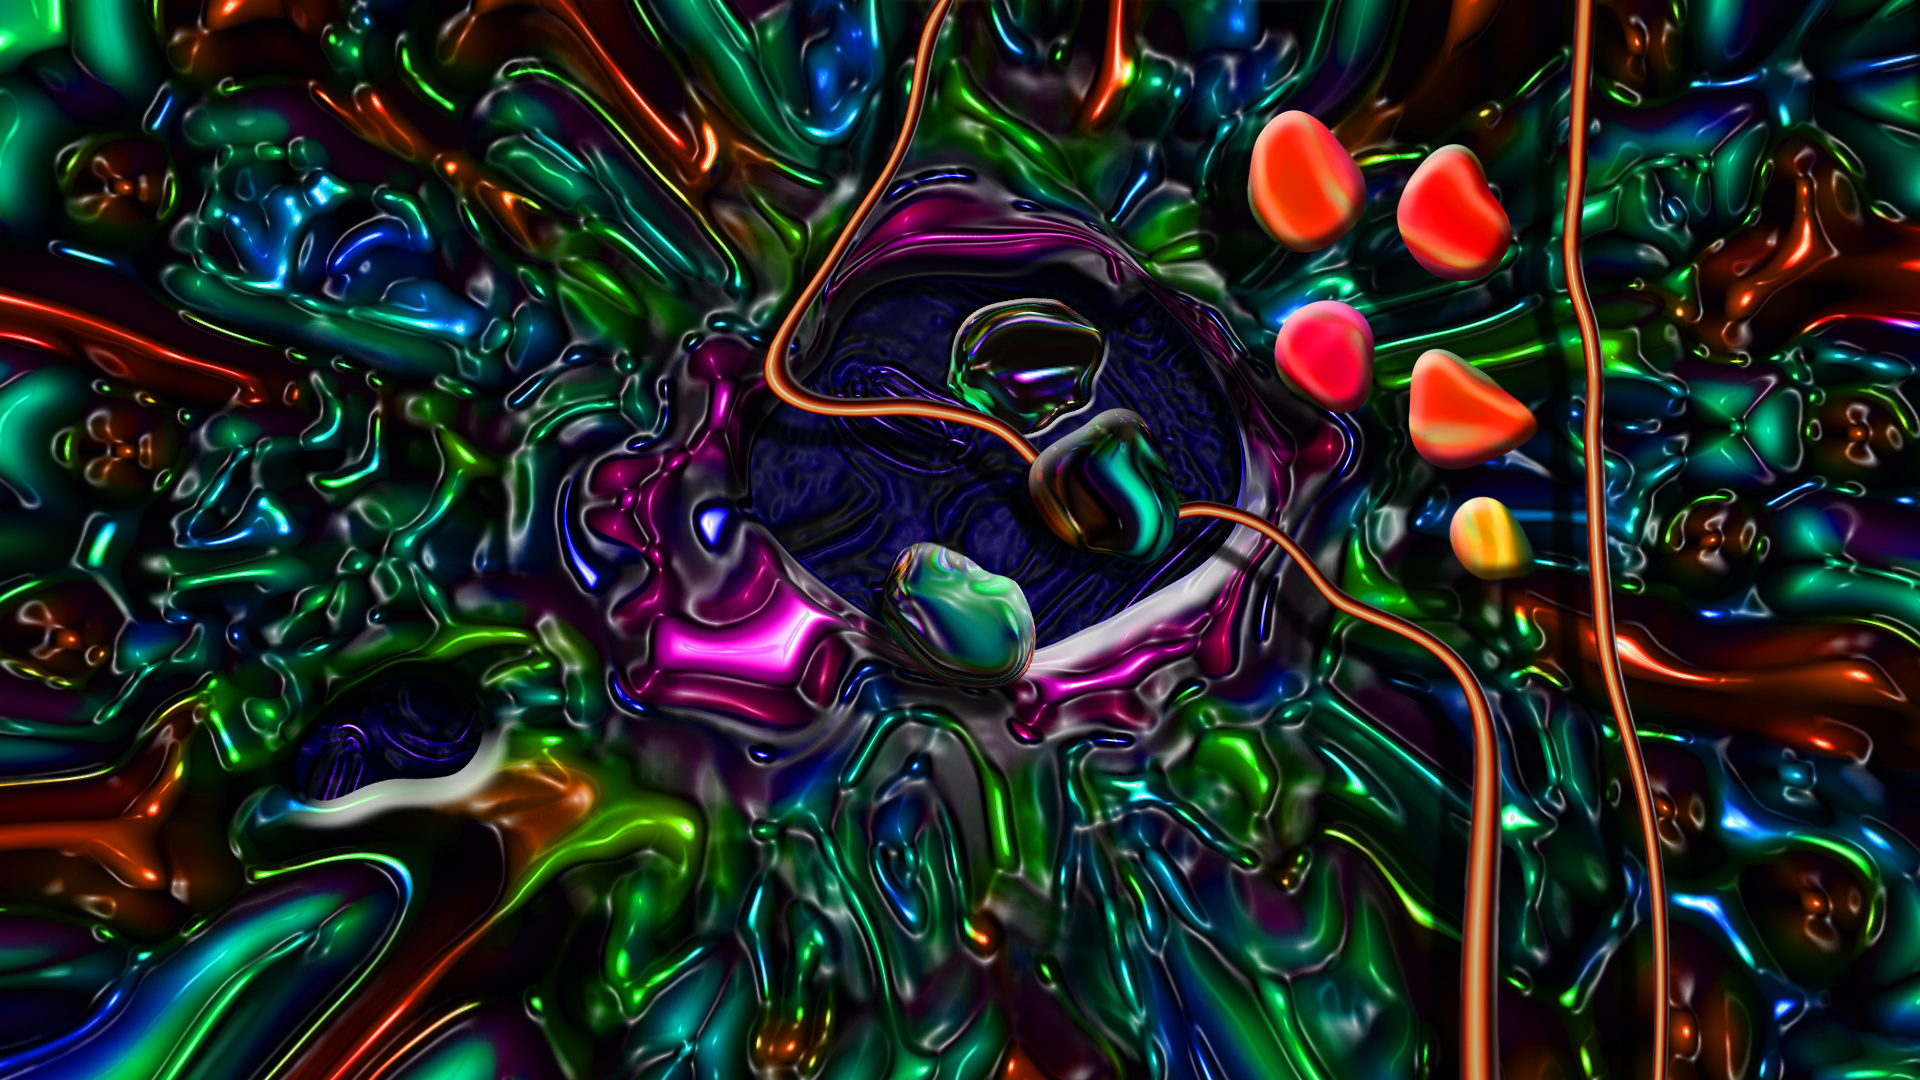 Miscellaneous Digital Art Trippy Colorful Picture